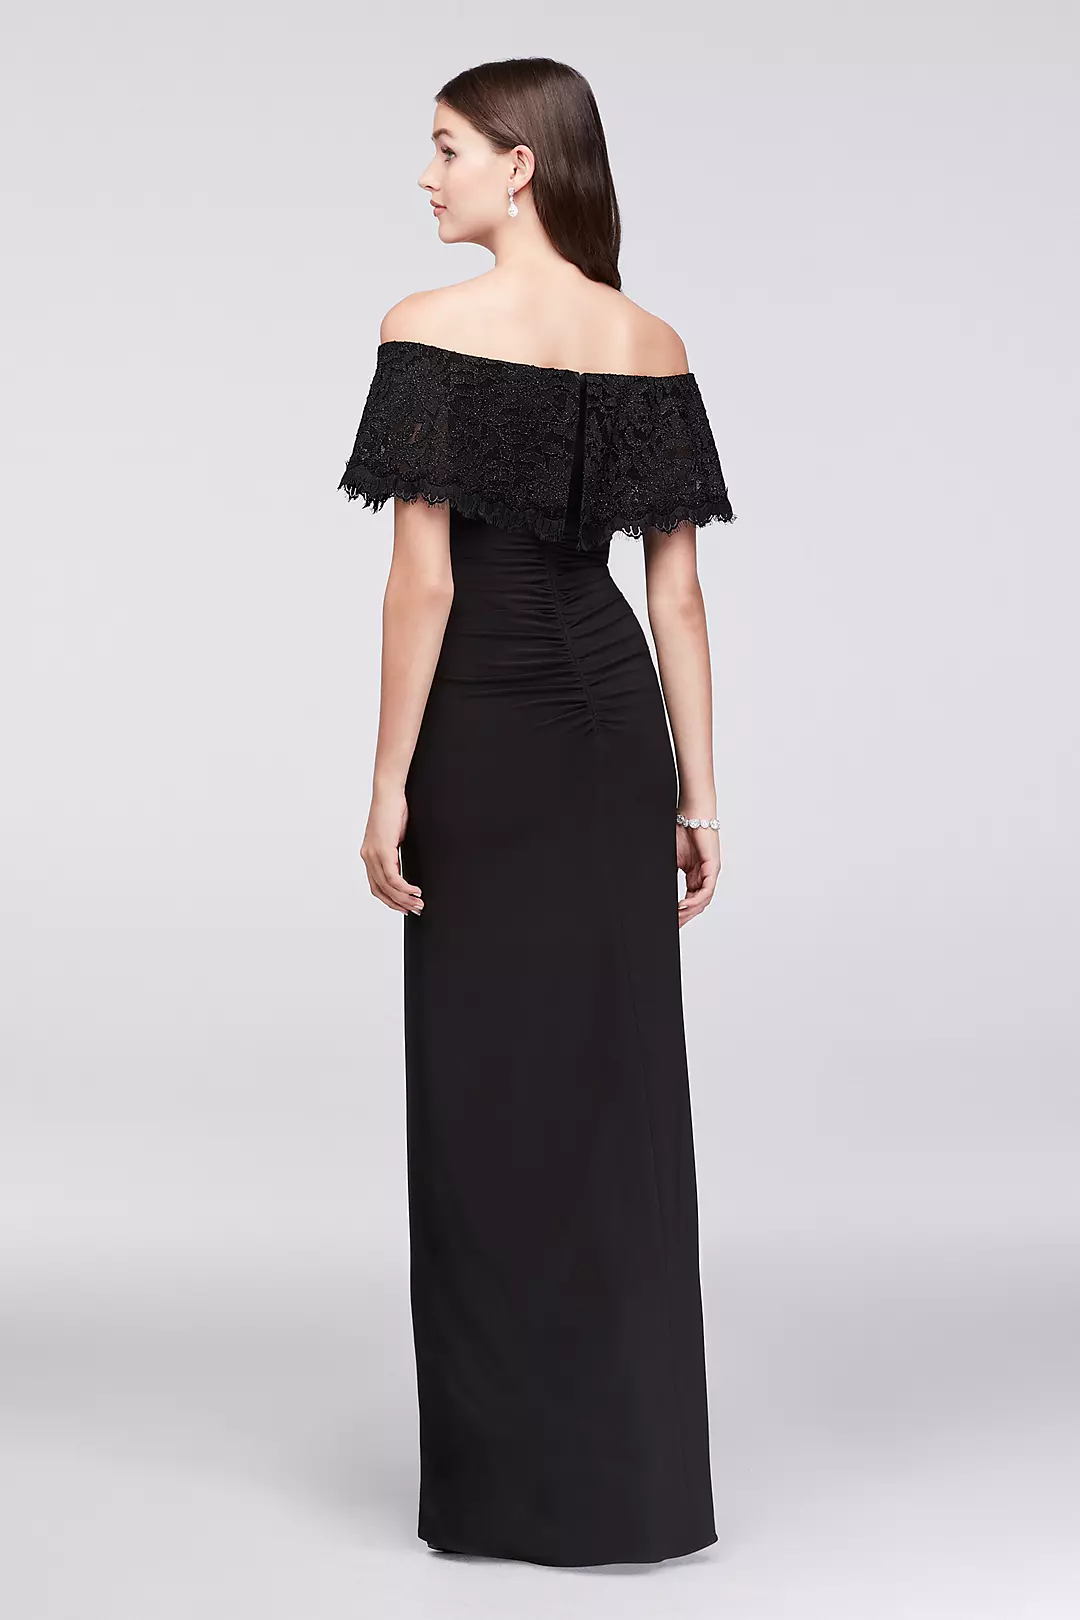 Glitter Lace Off-The-Shoulder Jersey Sheath Gown Image 2